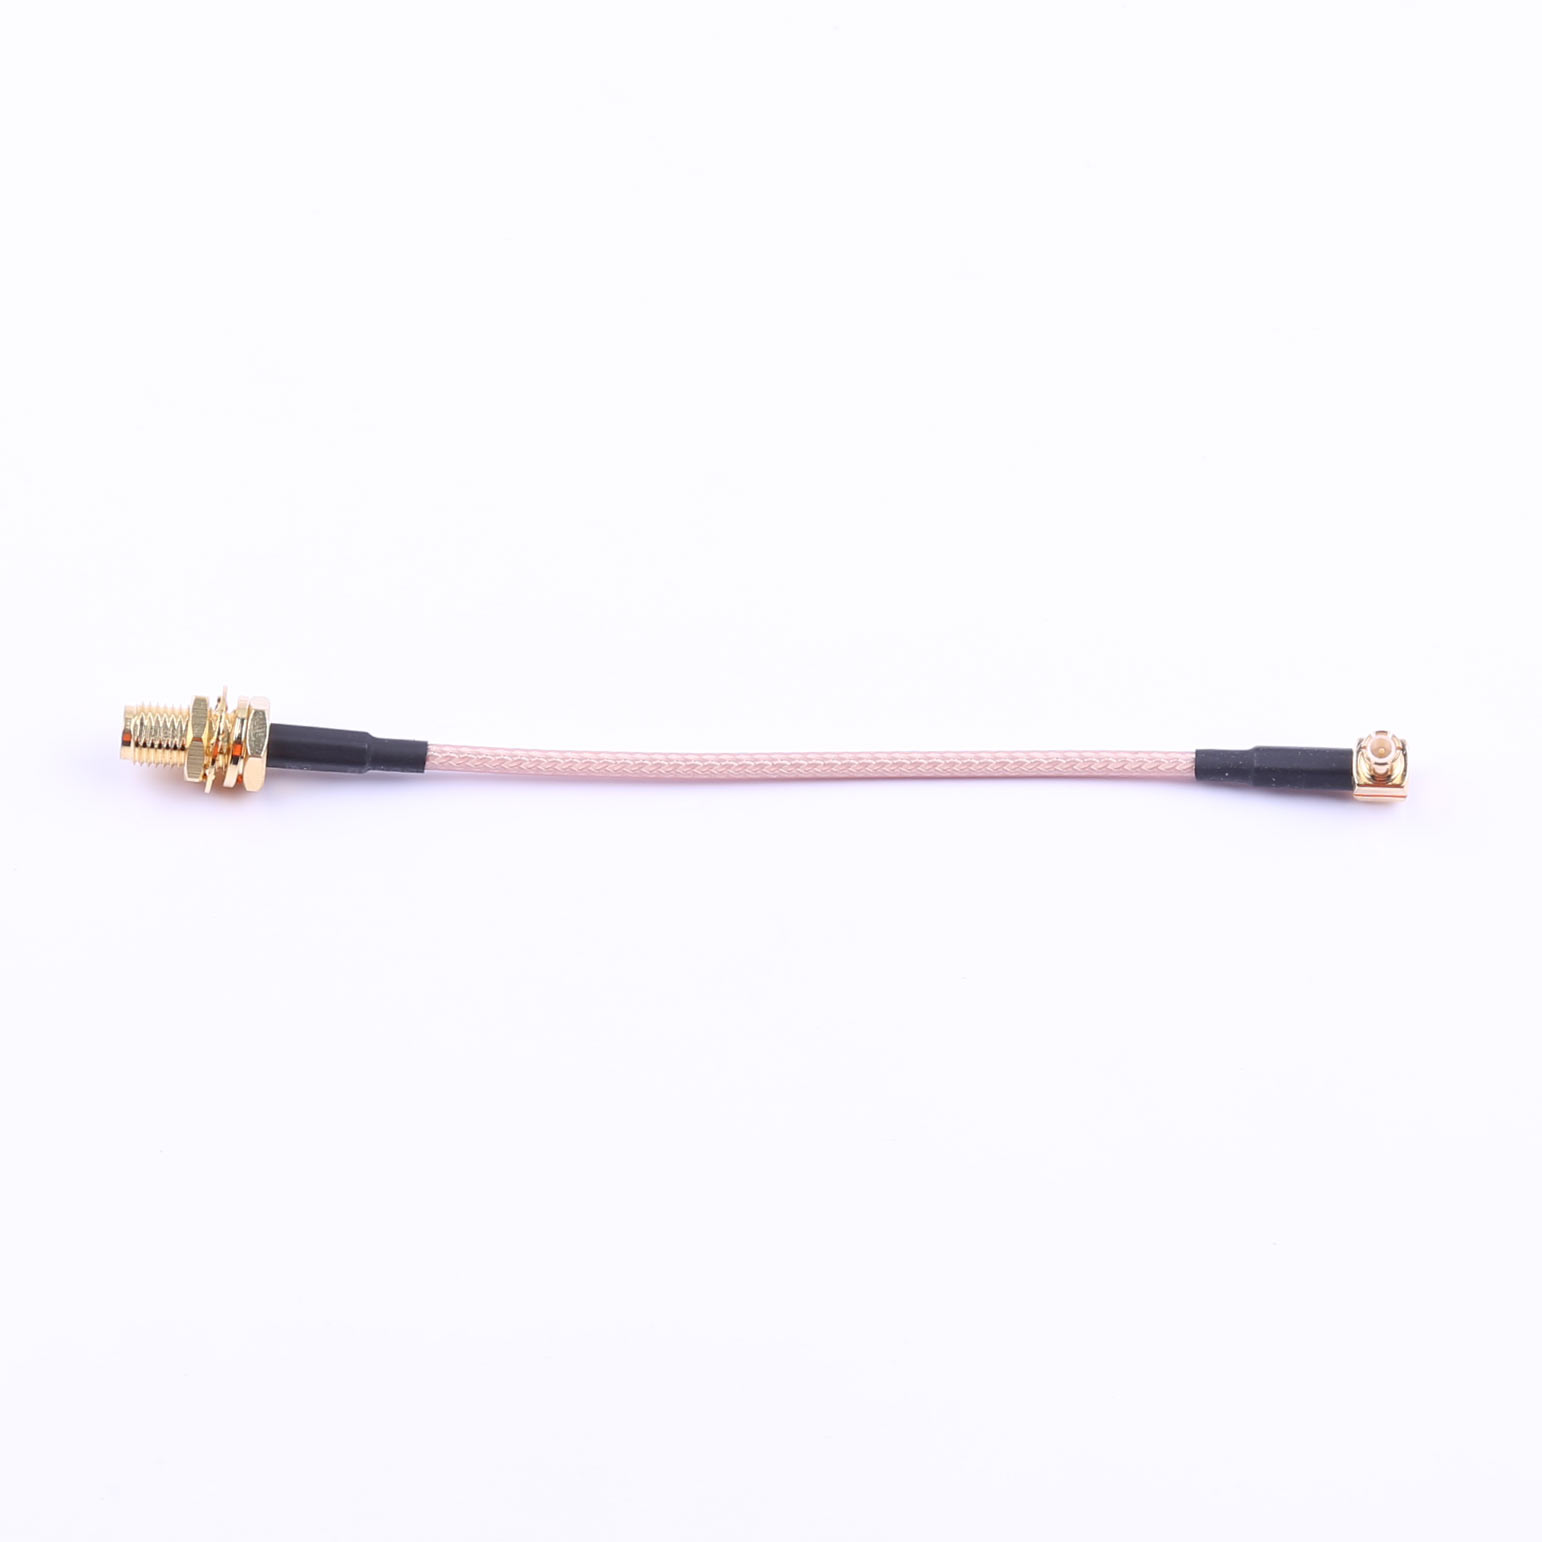 Kinghelm Coaxial connector Rotor radio frequency cable, MCX to SMA gold-plated external thread inner hole, RG316, L 100mm (4-piece set) - KHB (RG316) -MCX-100-28